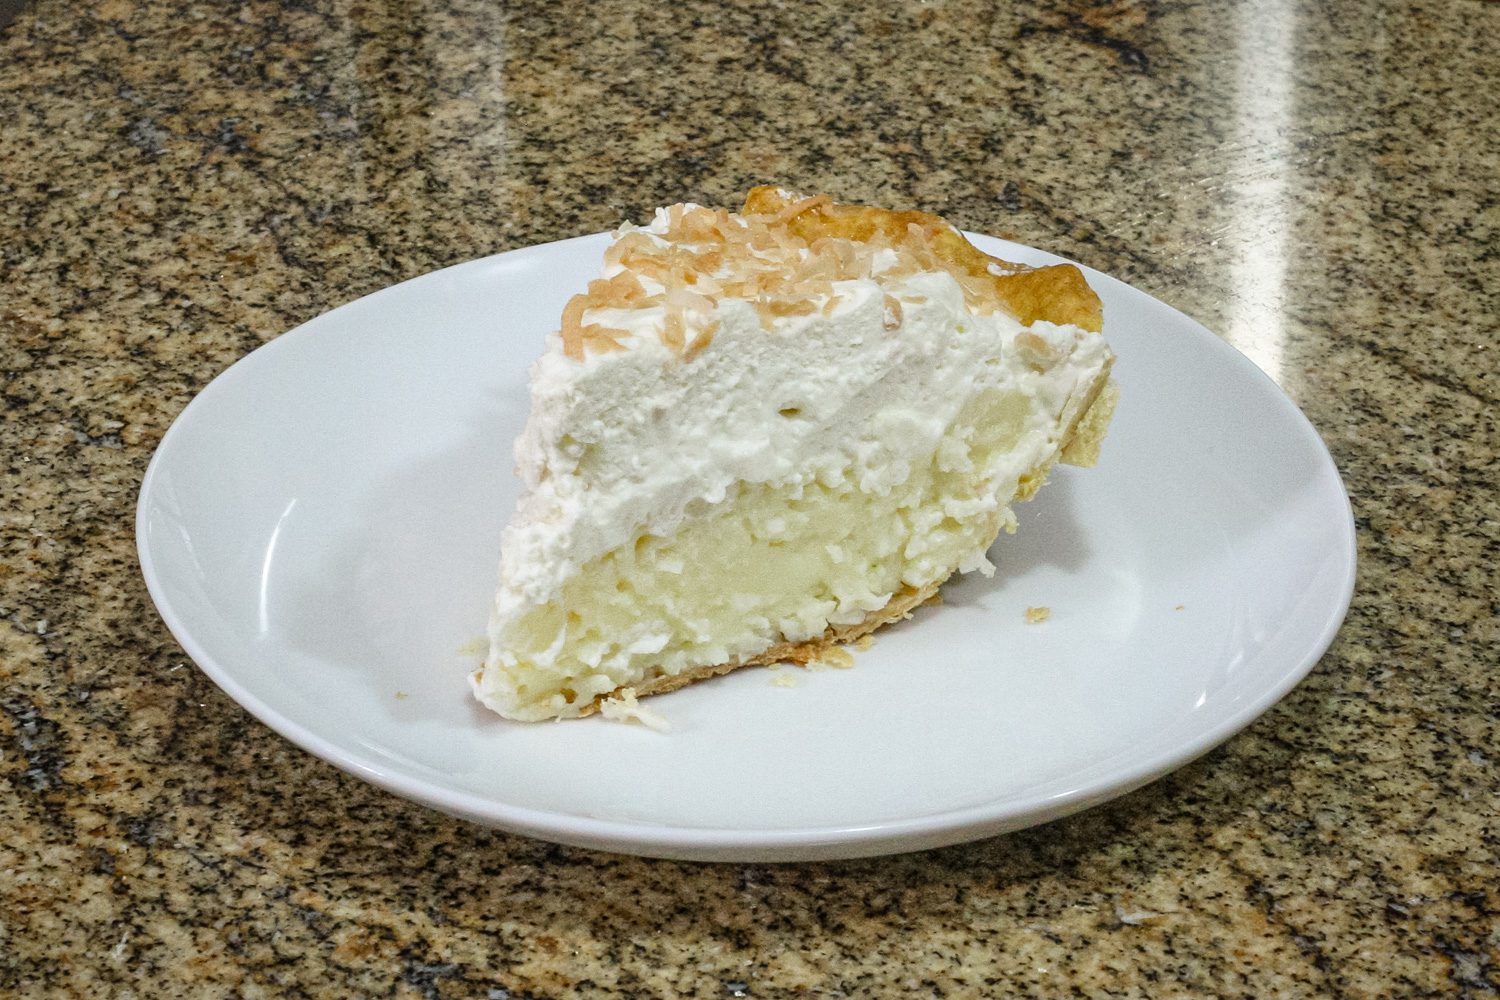 a slice of coconut cream pie with toasted coconut garnish